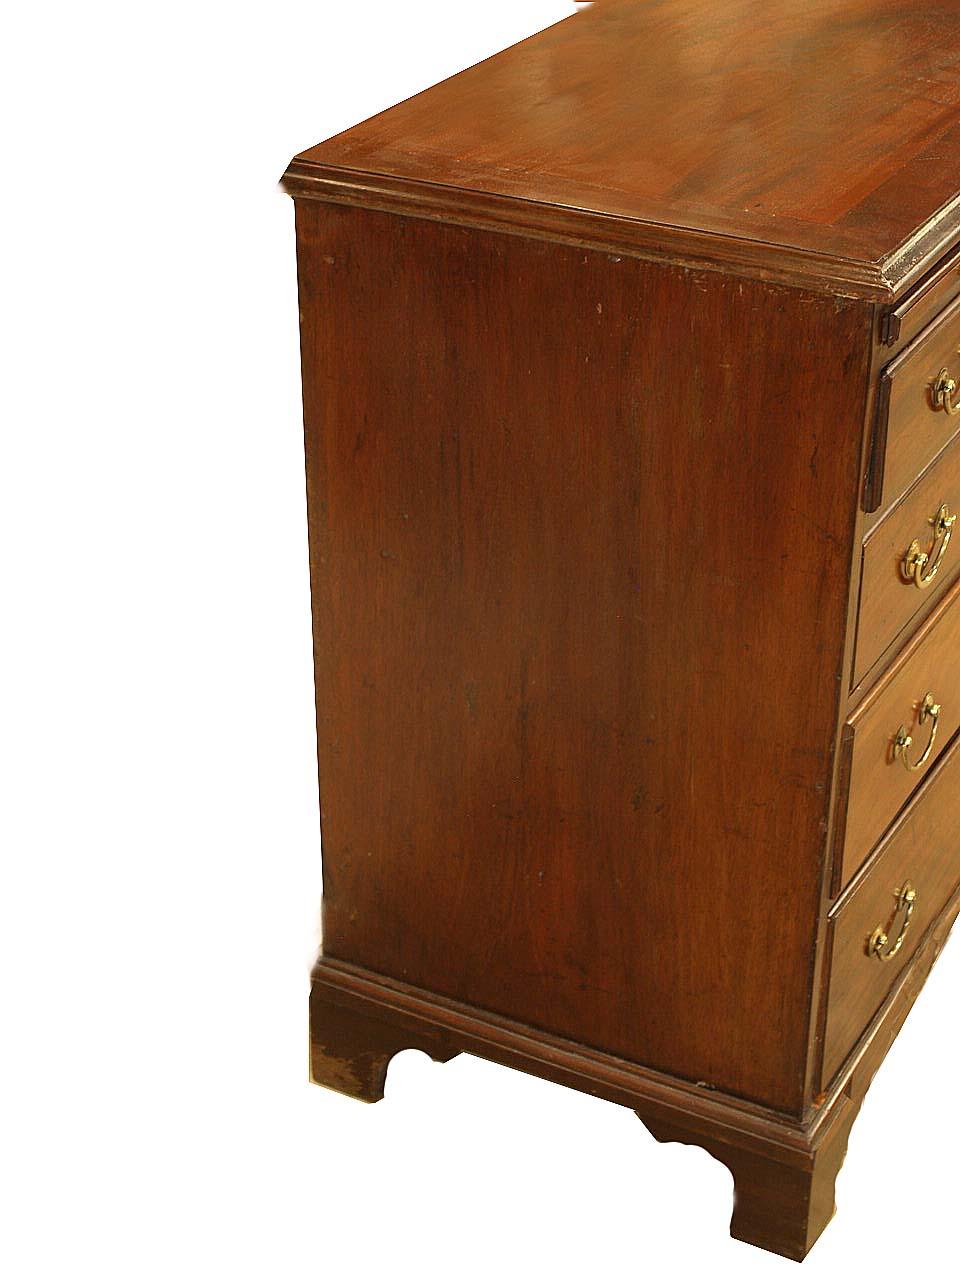 English mahogany bachelor's chest, with cross banded top, the four graduated drawers with overlapping molding are below the pull out brushing slide; the secondary wood is oak. The brass pulls are antique but not original; the chest rests on bracket